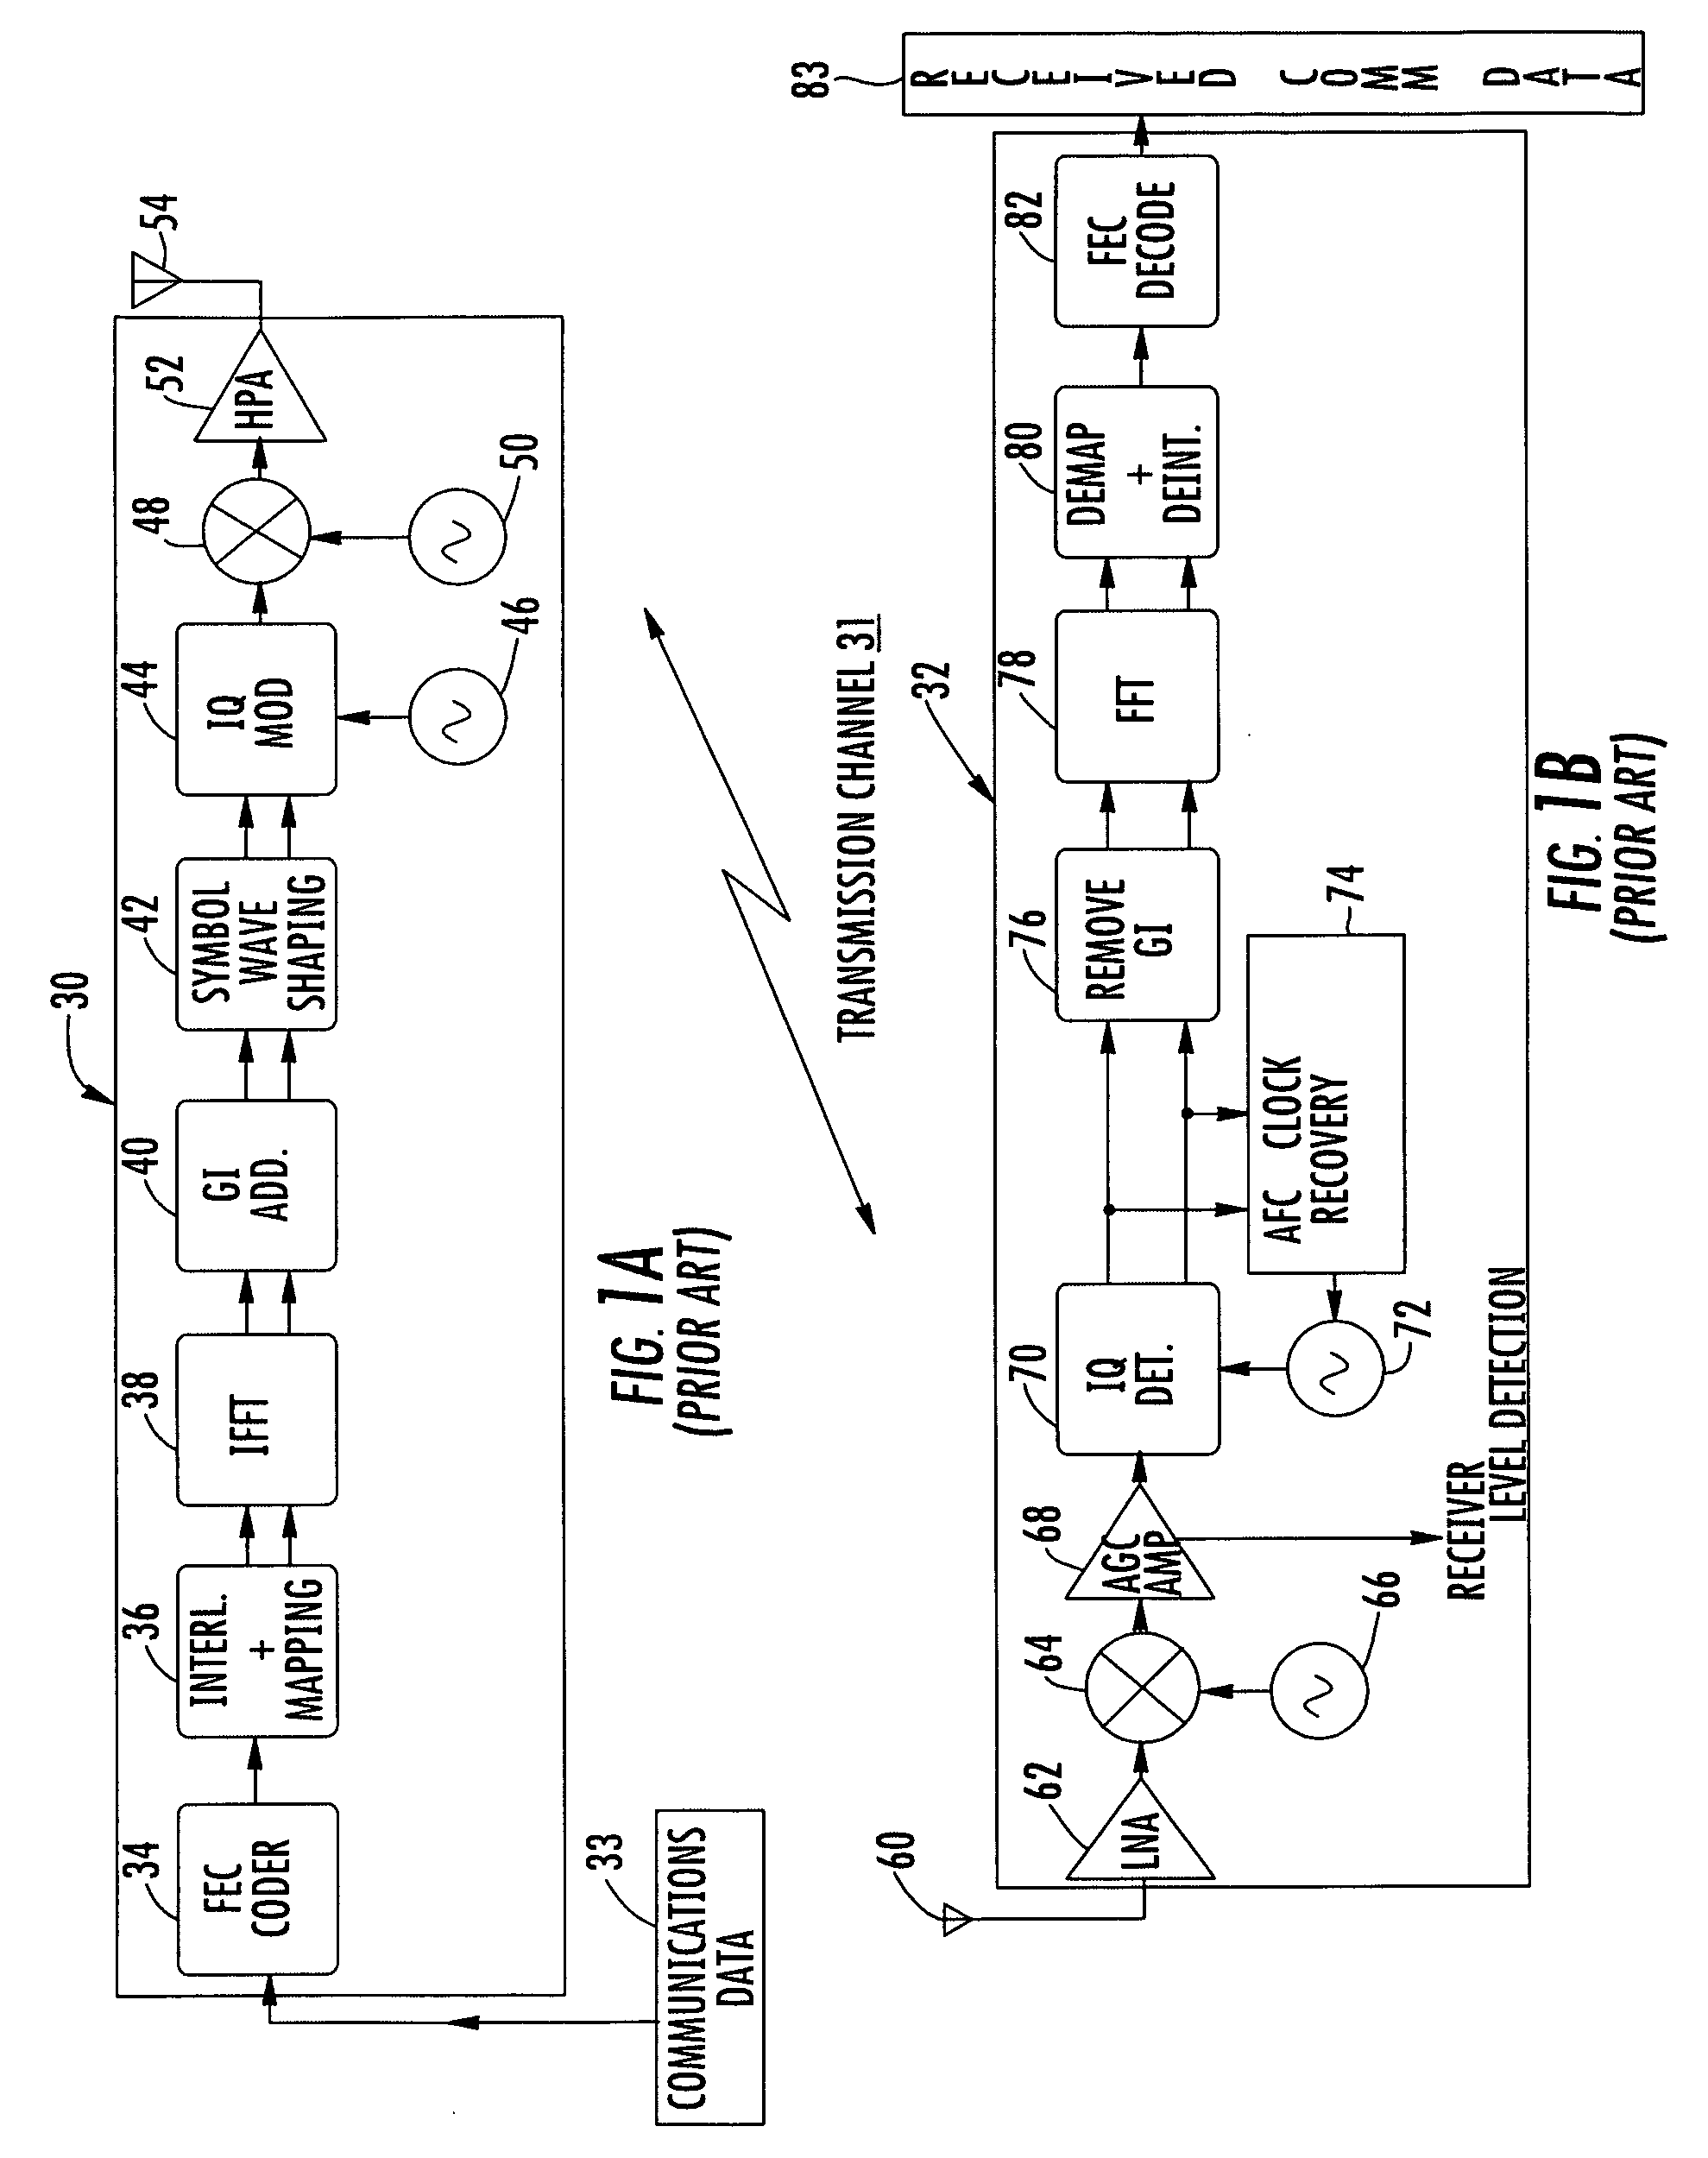 System and method for communicating data using efficient fast fourier transform (FFT) for orthogonal frequency division multiplexing (OFDM)